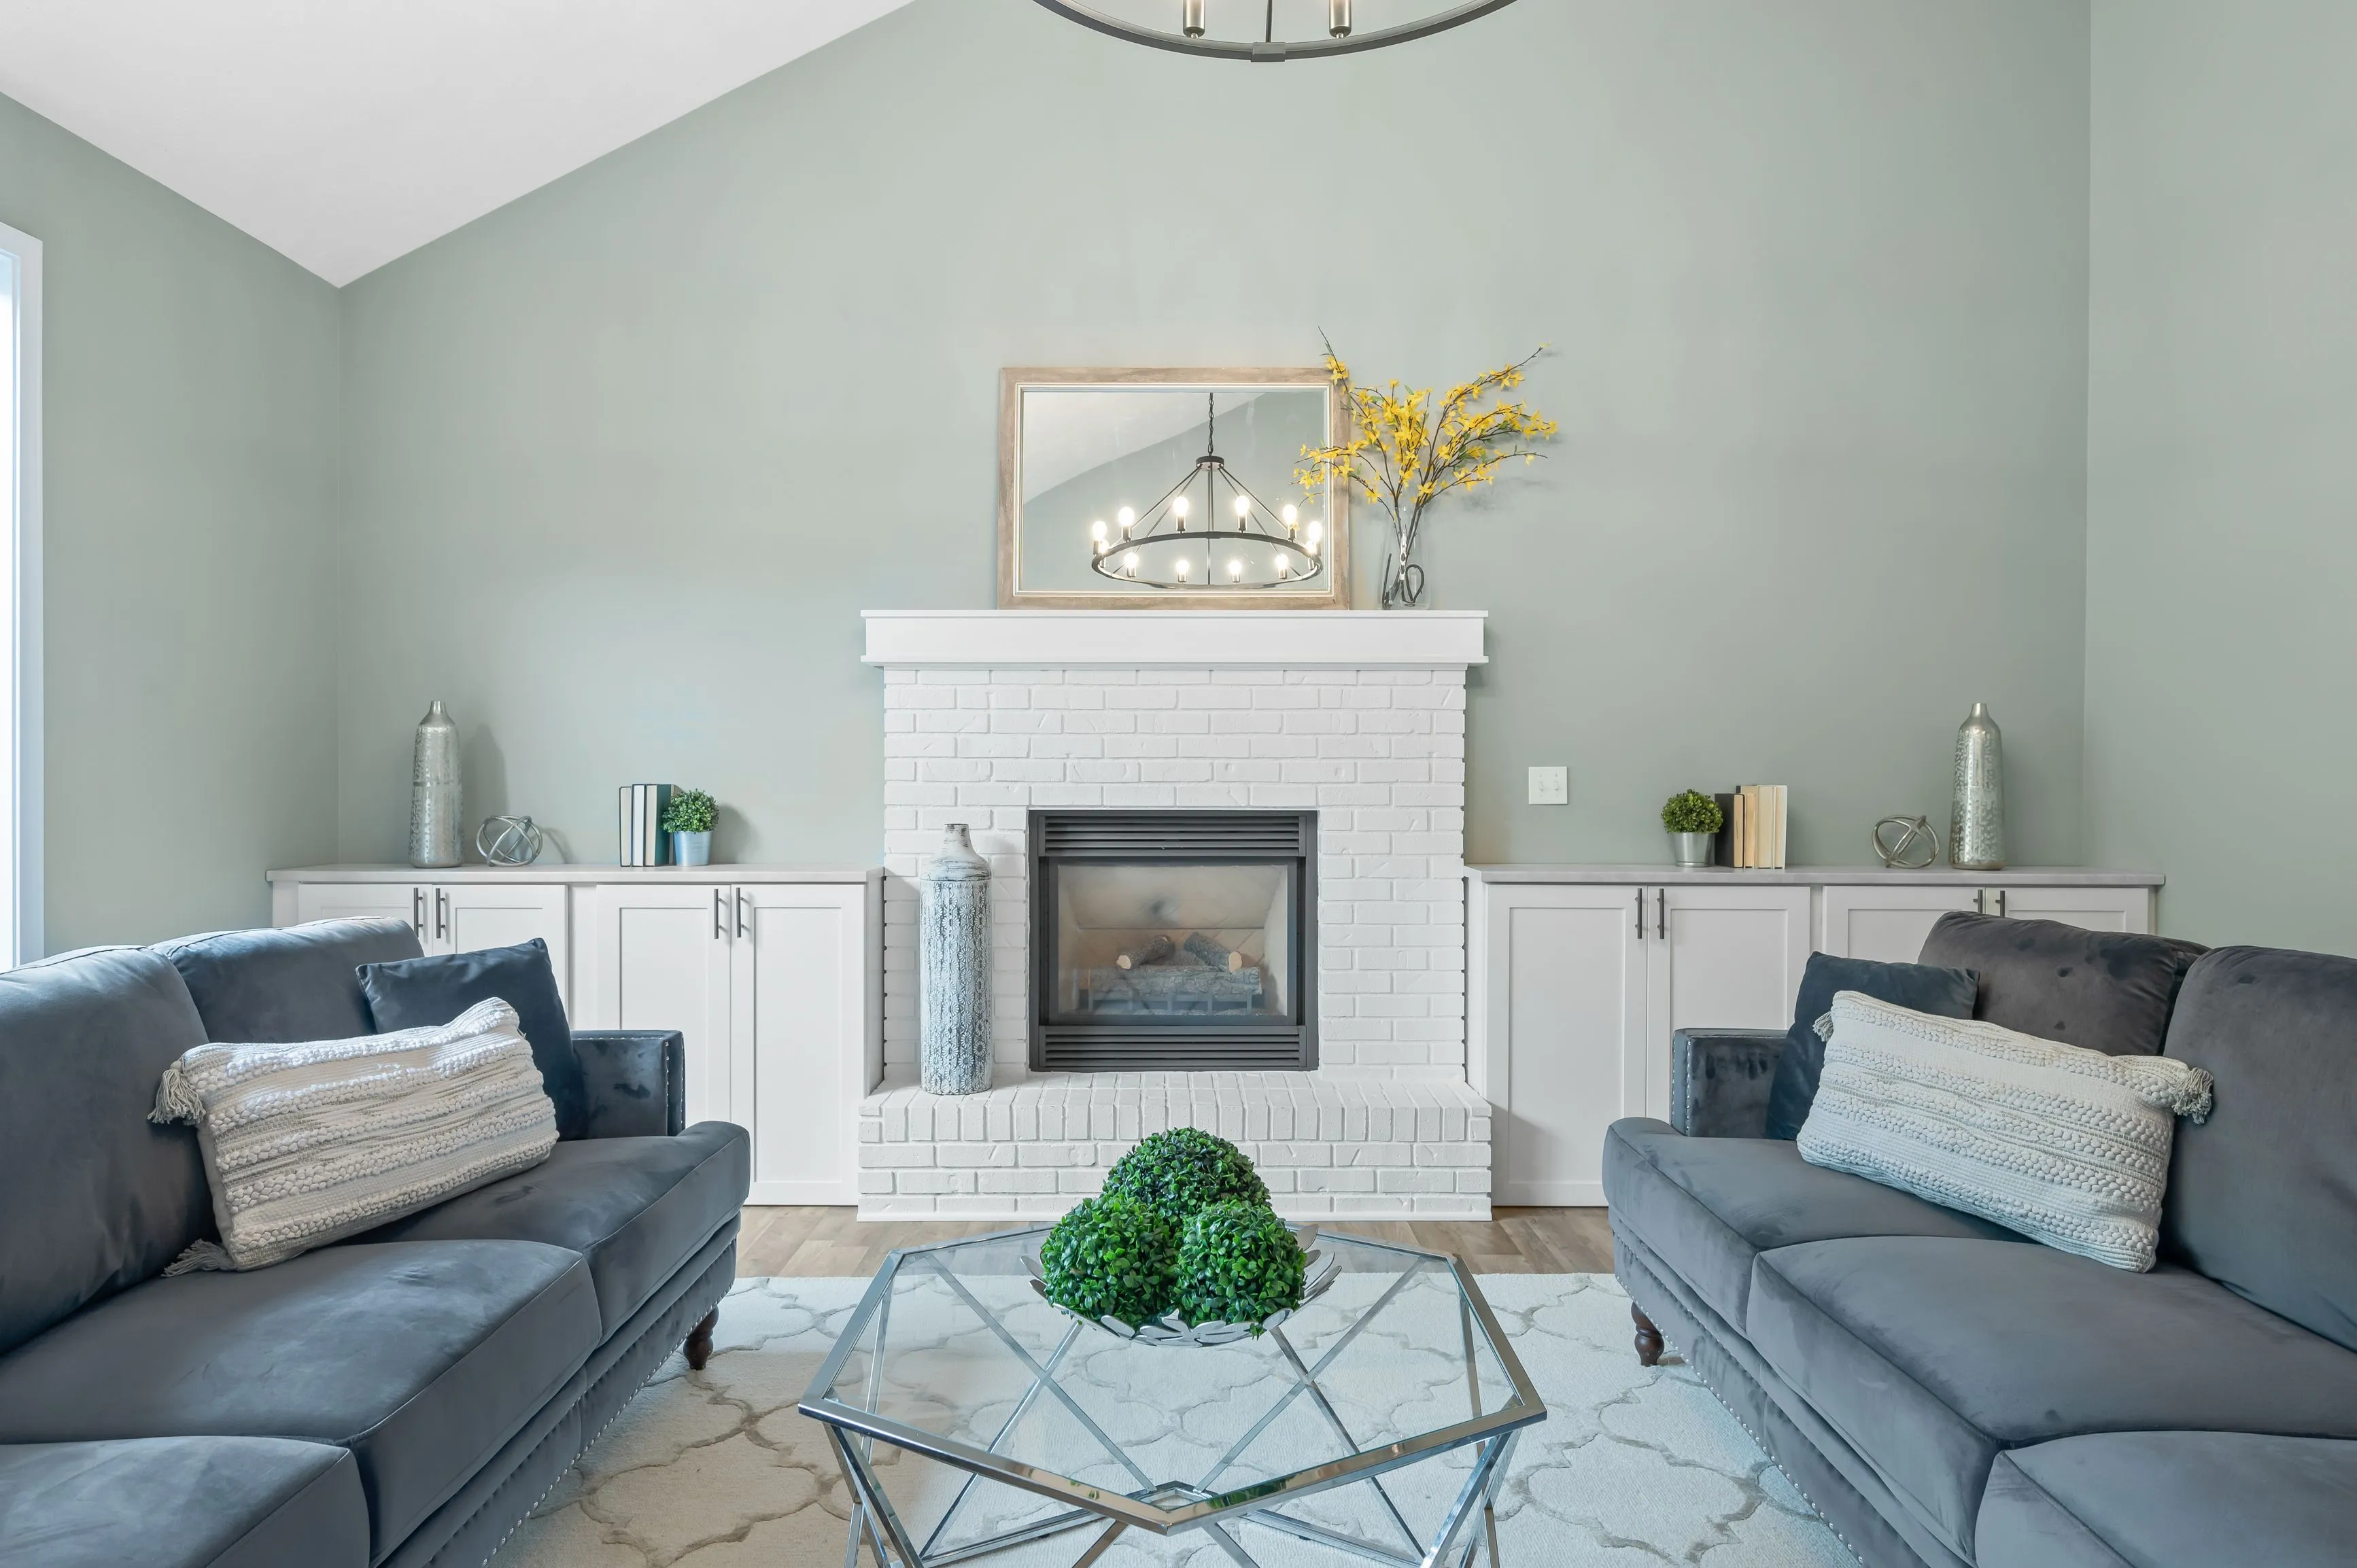 Elegant living room with light green walls, a white brick fireplace, two dark grey sofas, and a geometric glass coffee table with a decorative greenery centerpiece.